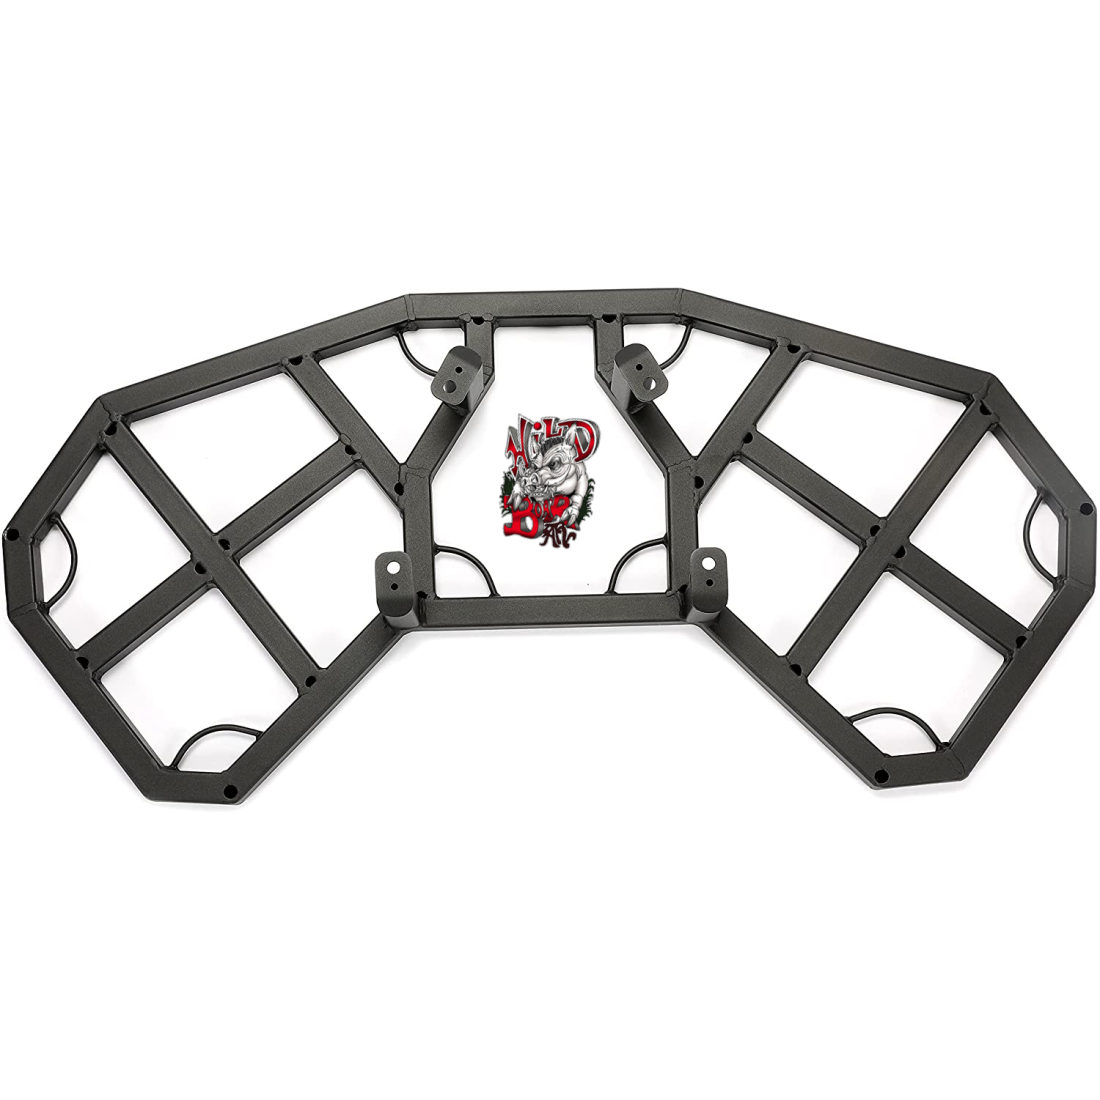 Canam Renegade All Years All Models Black Rear Rack